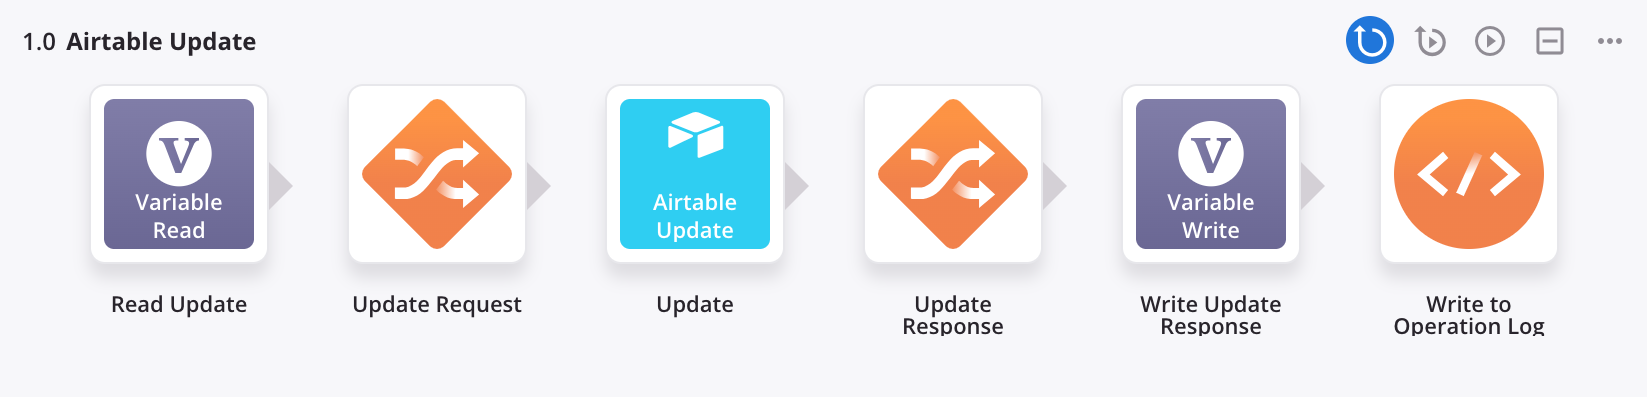 Airtable Update operation